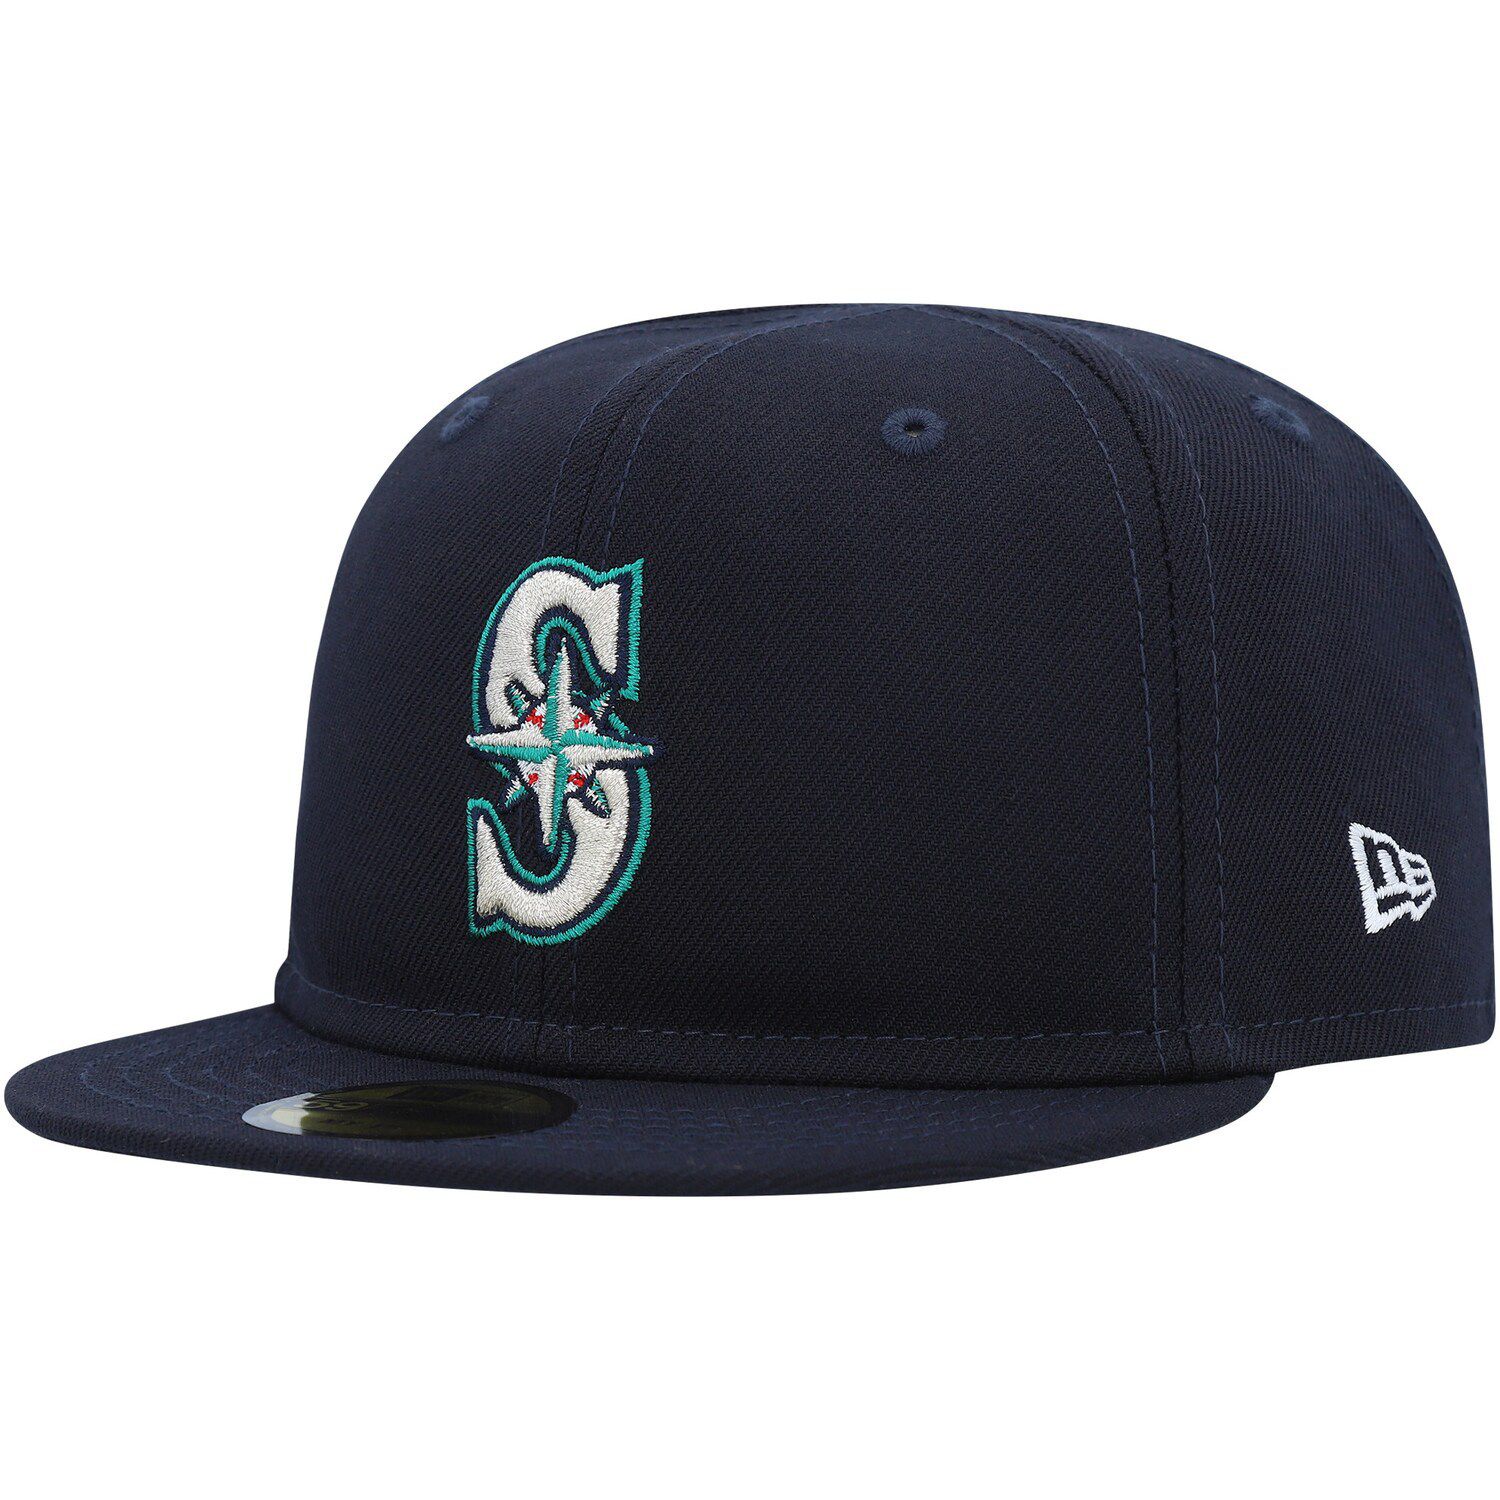 Men's New Era White/Black Seattle Mariners 40th Anniversary Primary Eye 59FIFTY Fitted Hat